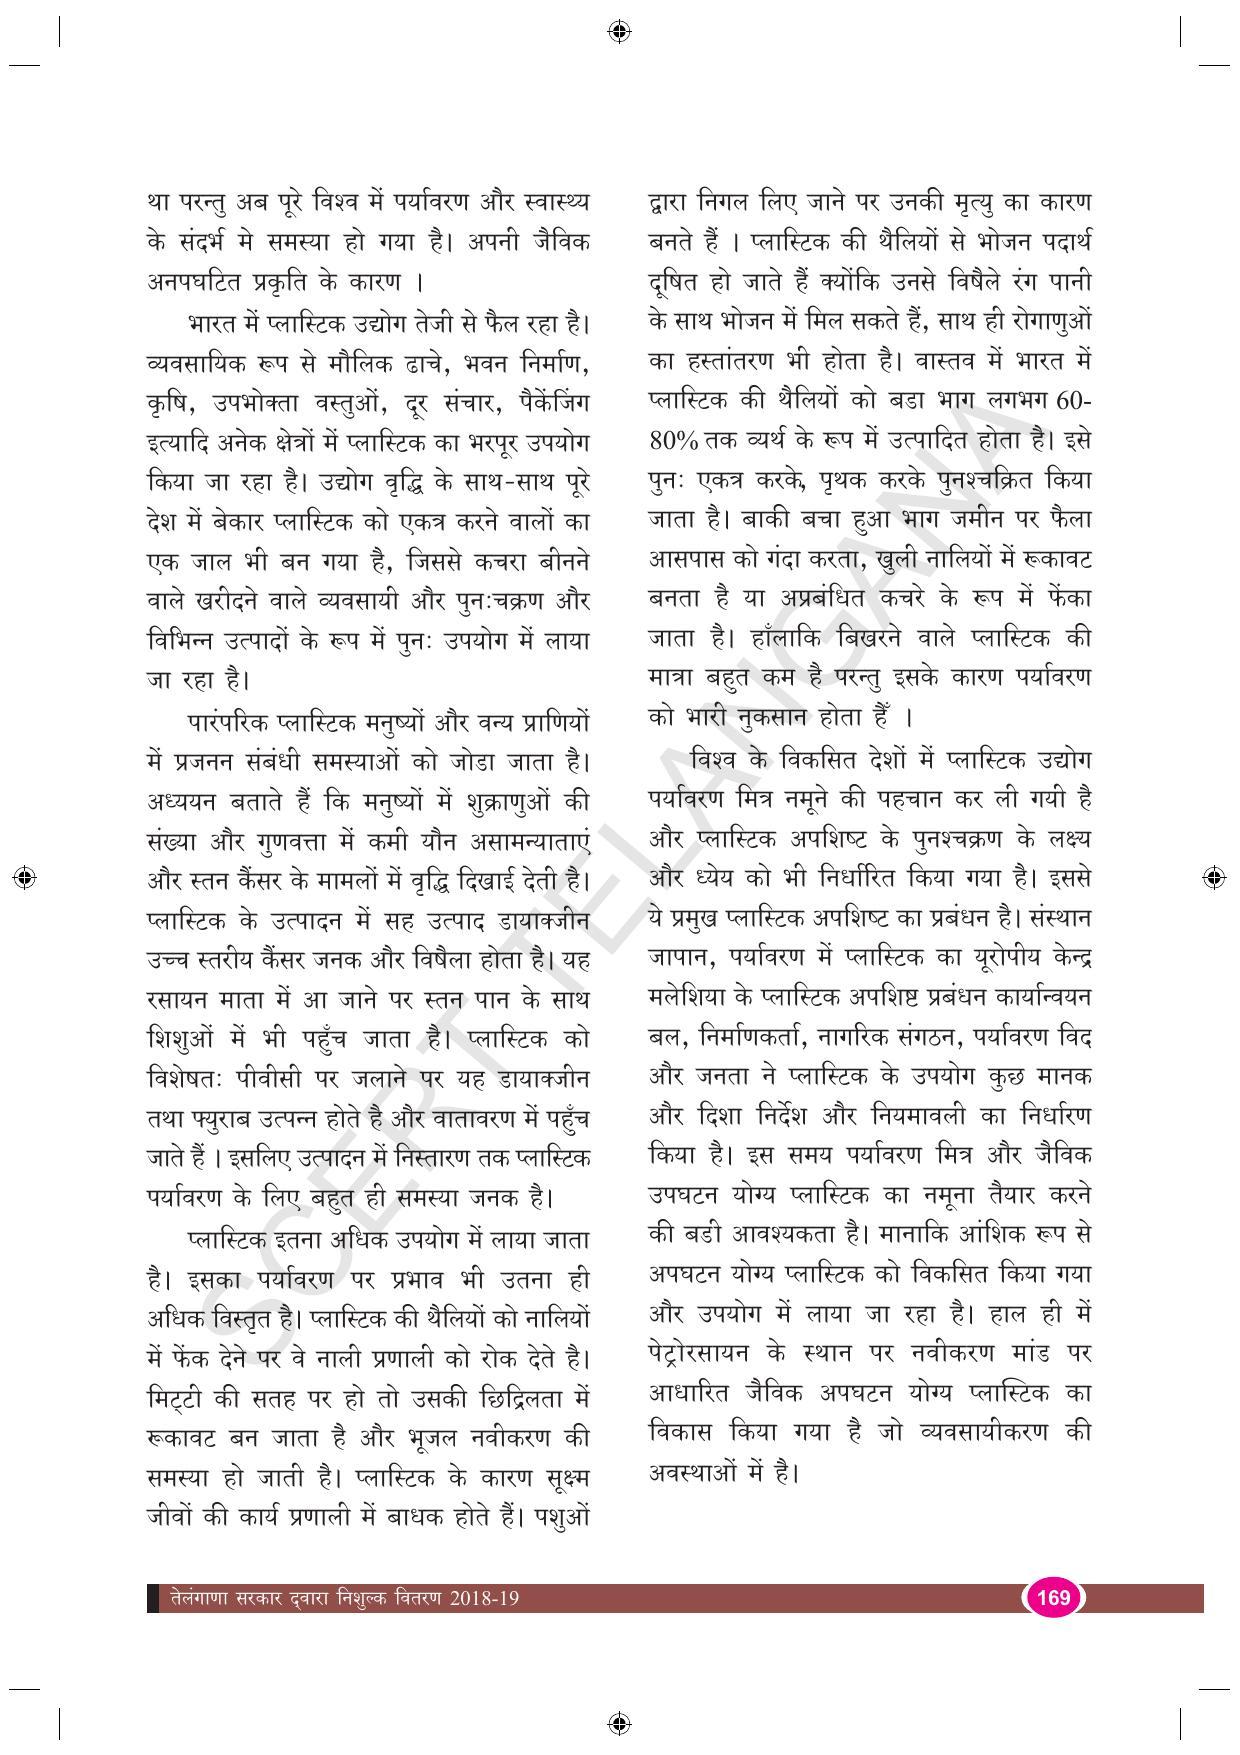 TS SCERT Class 9 Biological Science (Hindi Medium) Text Book - Page 181